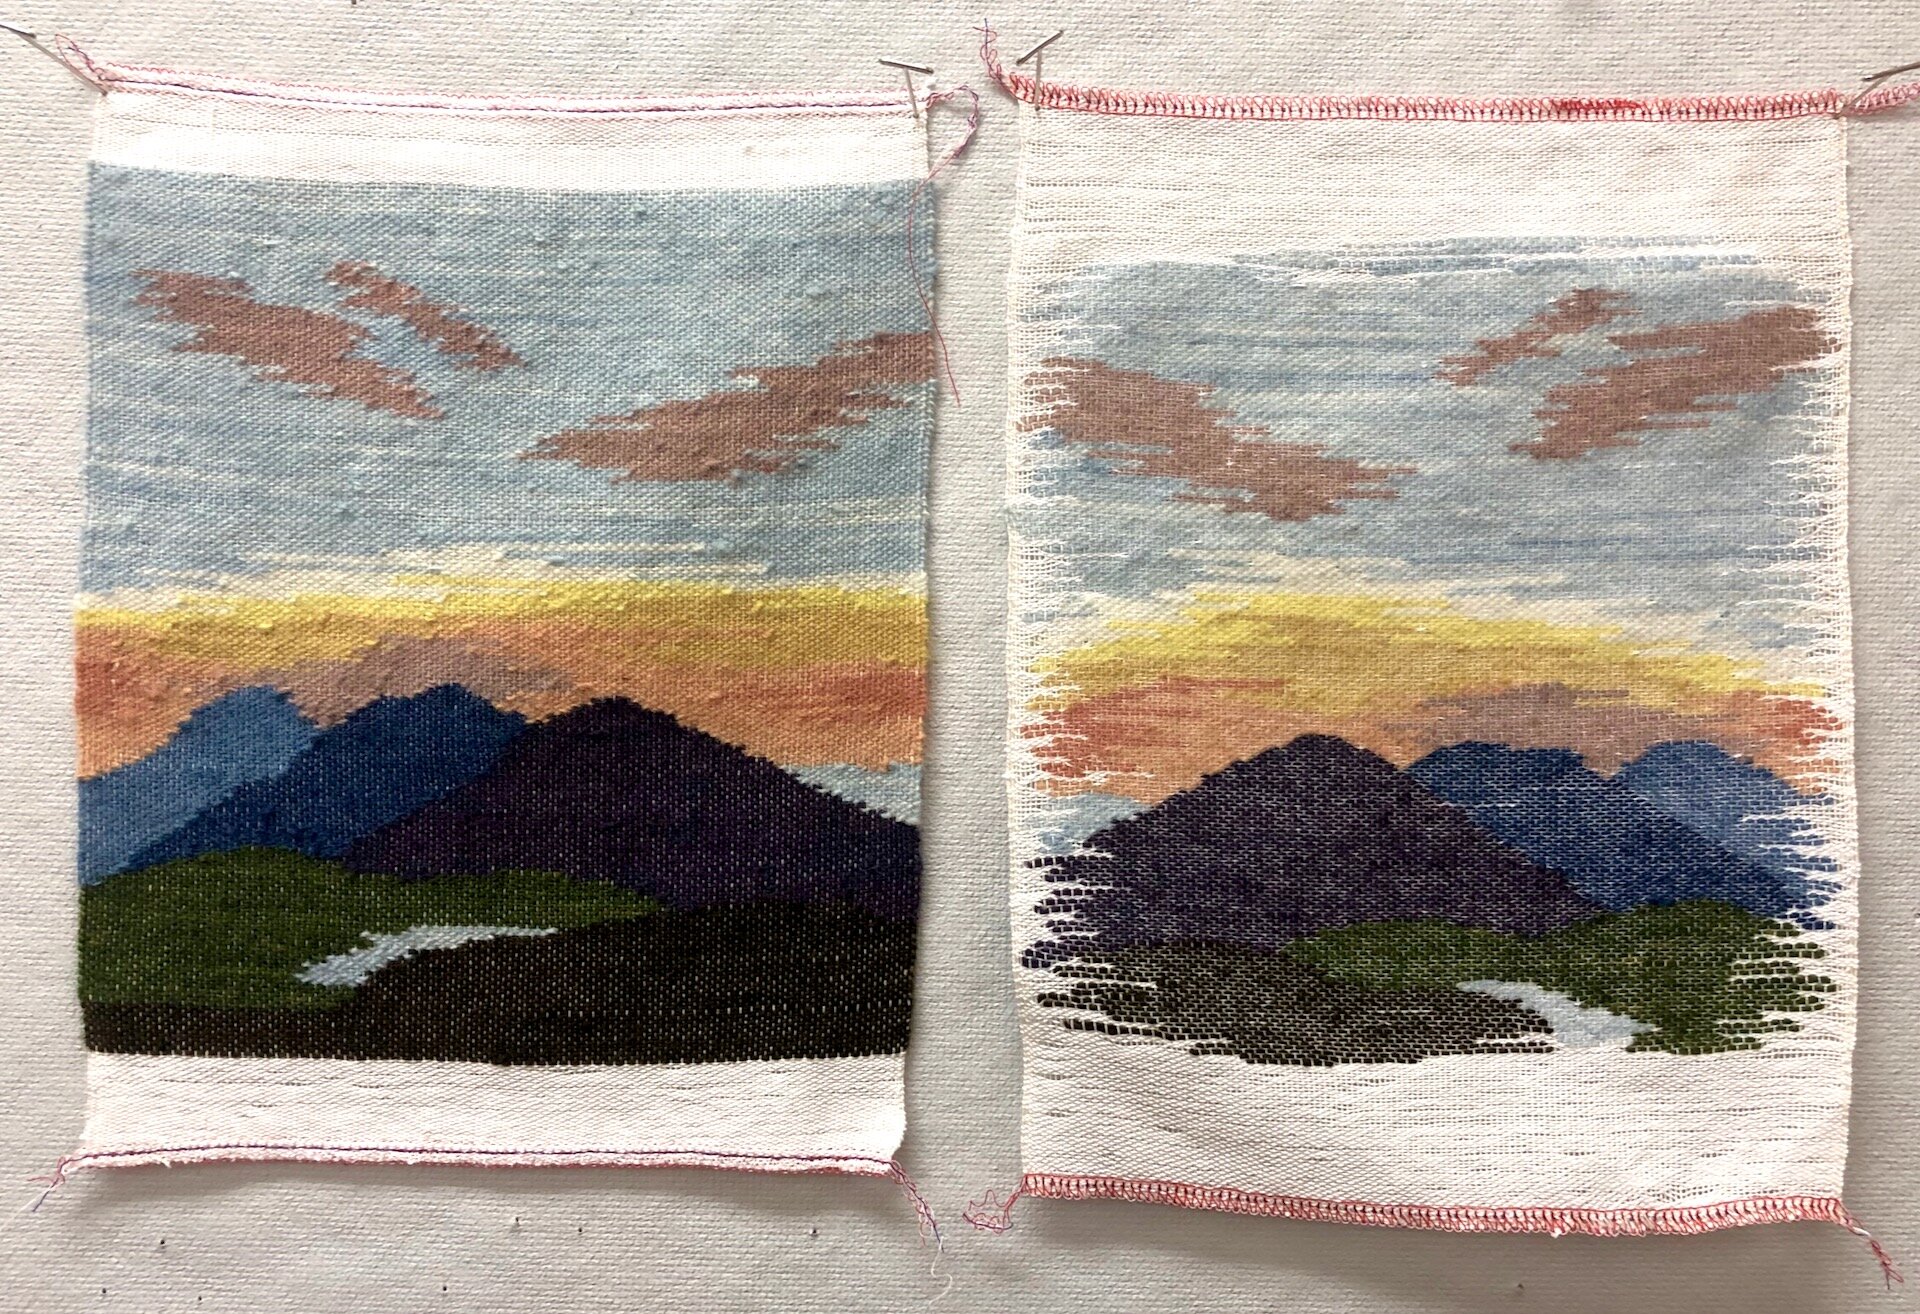   Alice Tipton Landscapes: Two Ways , 2020. Cotton warp and naturally dyed wool singles weft. 8.75” x 9.75” each. These pieces are based on the tapestries of Alice Tipton, a weaver who worked at John C. Campbell during the 20th c. The left piece is w